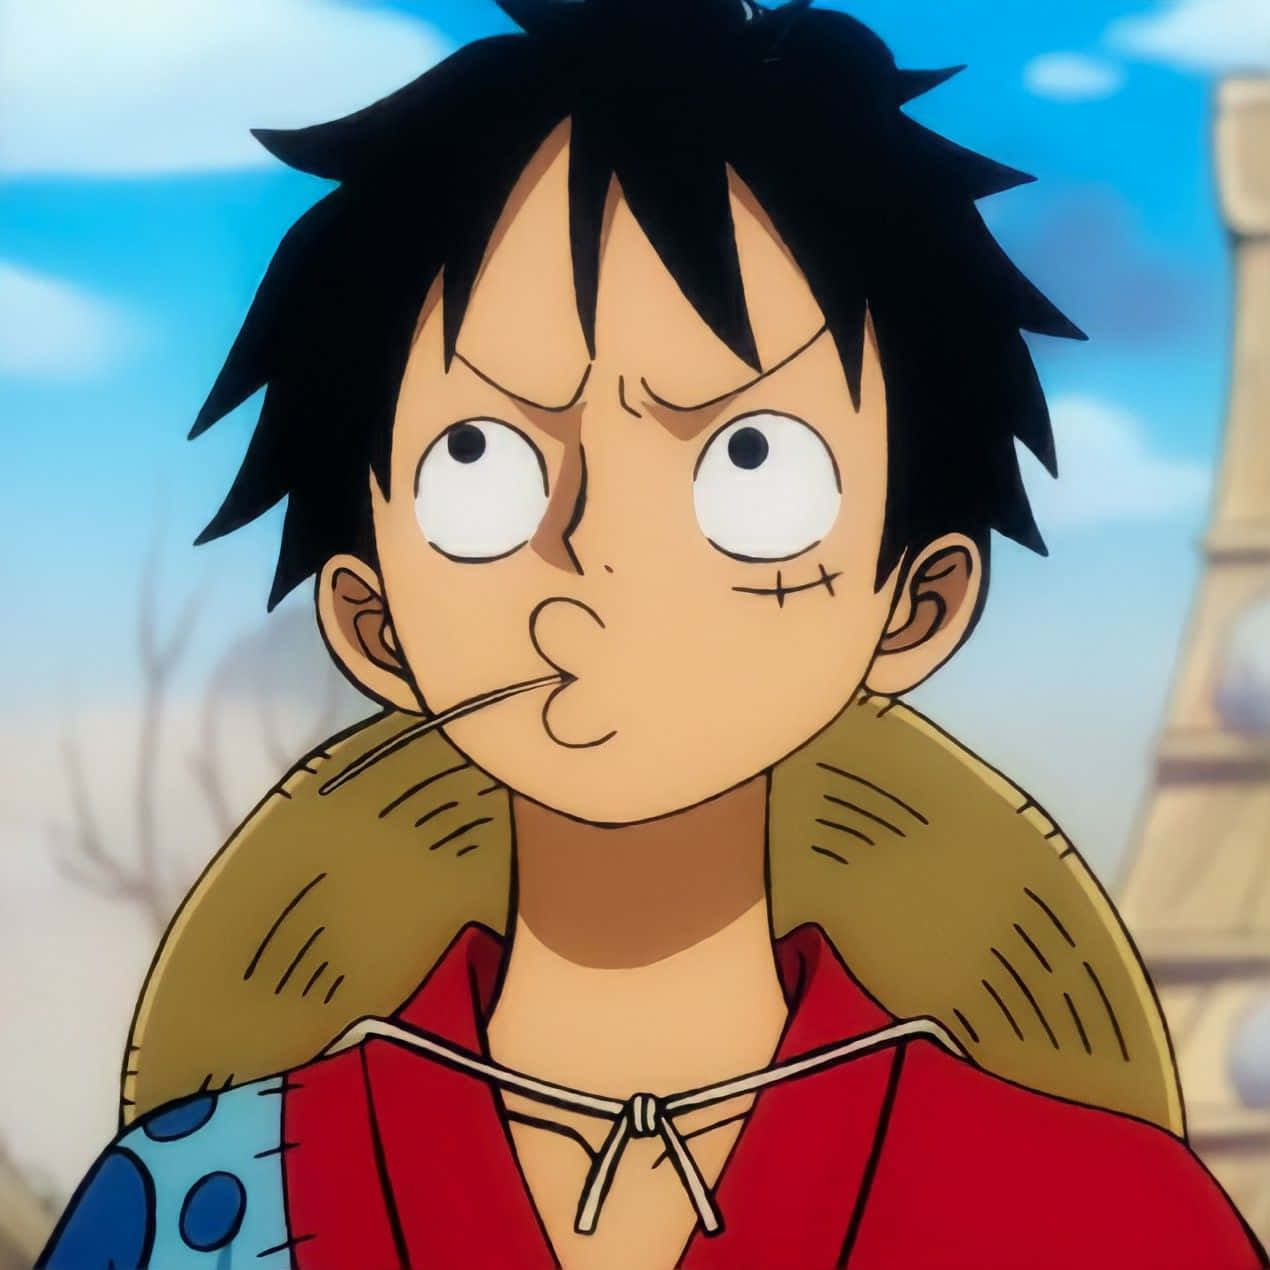 One Piece - A Boy With A Red Shirt And Black Hair